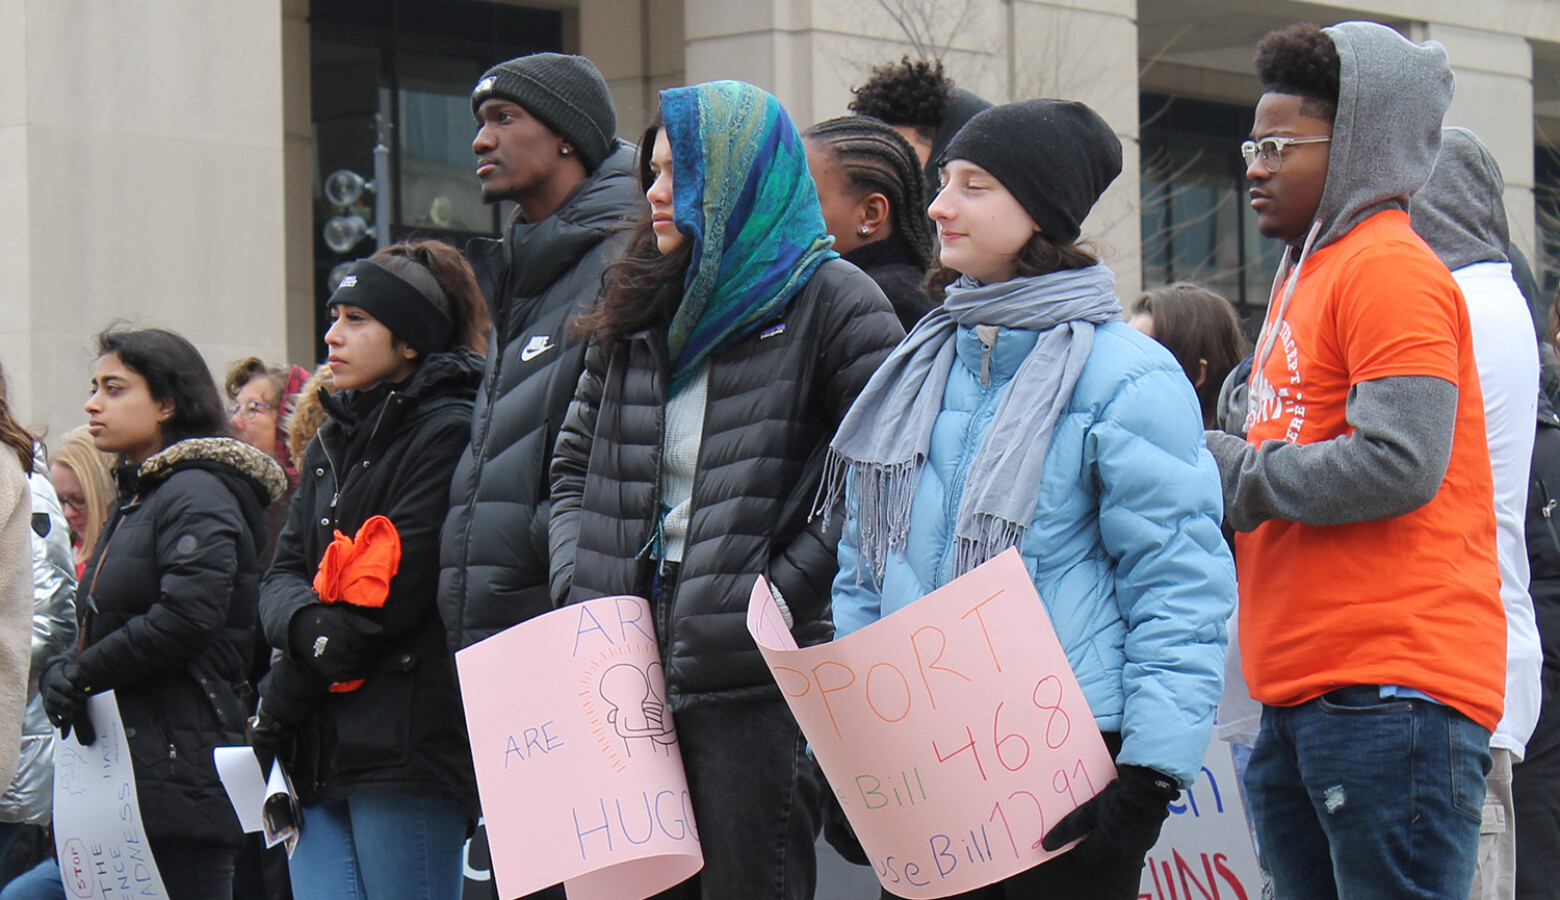 Members of the student-led group We Live Indy gathered at the Statehouse on Saturday March 2, 2019, calling for action on universal background checks. (FILE PHOTO: Lauren Chapman/IPB News)